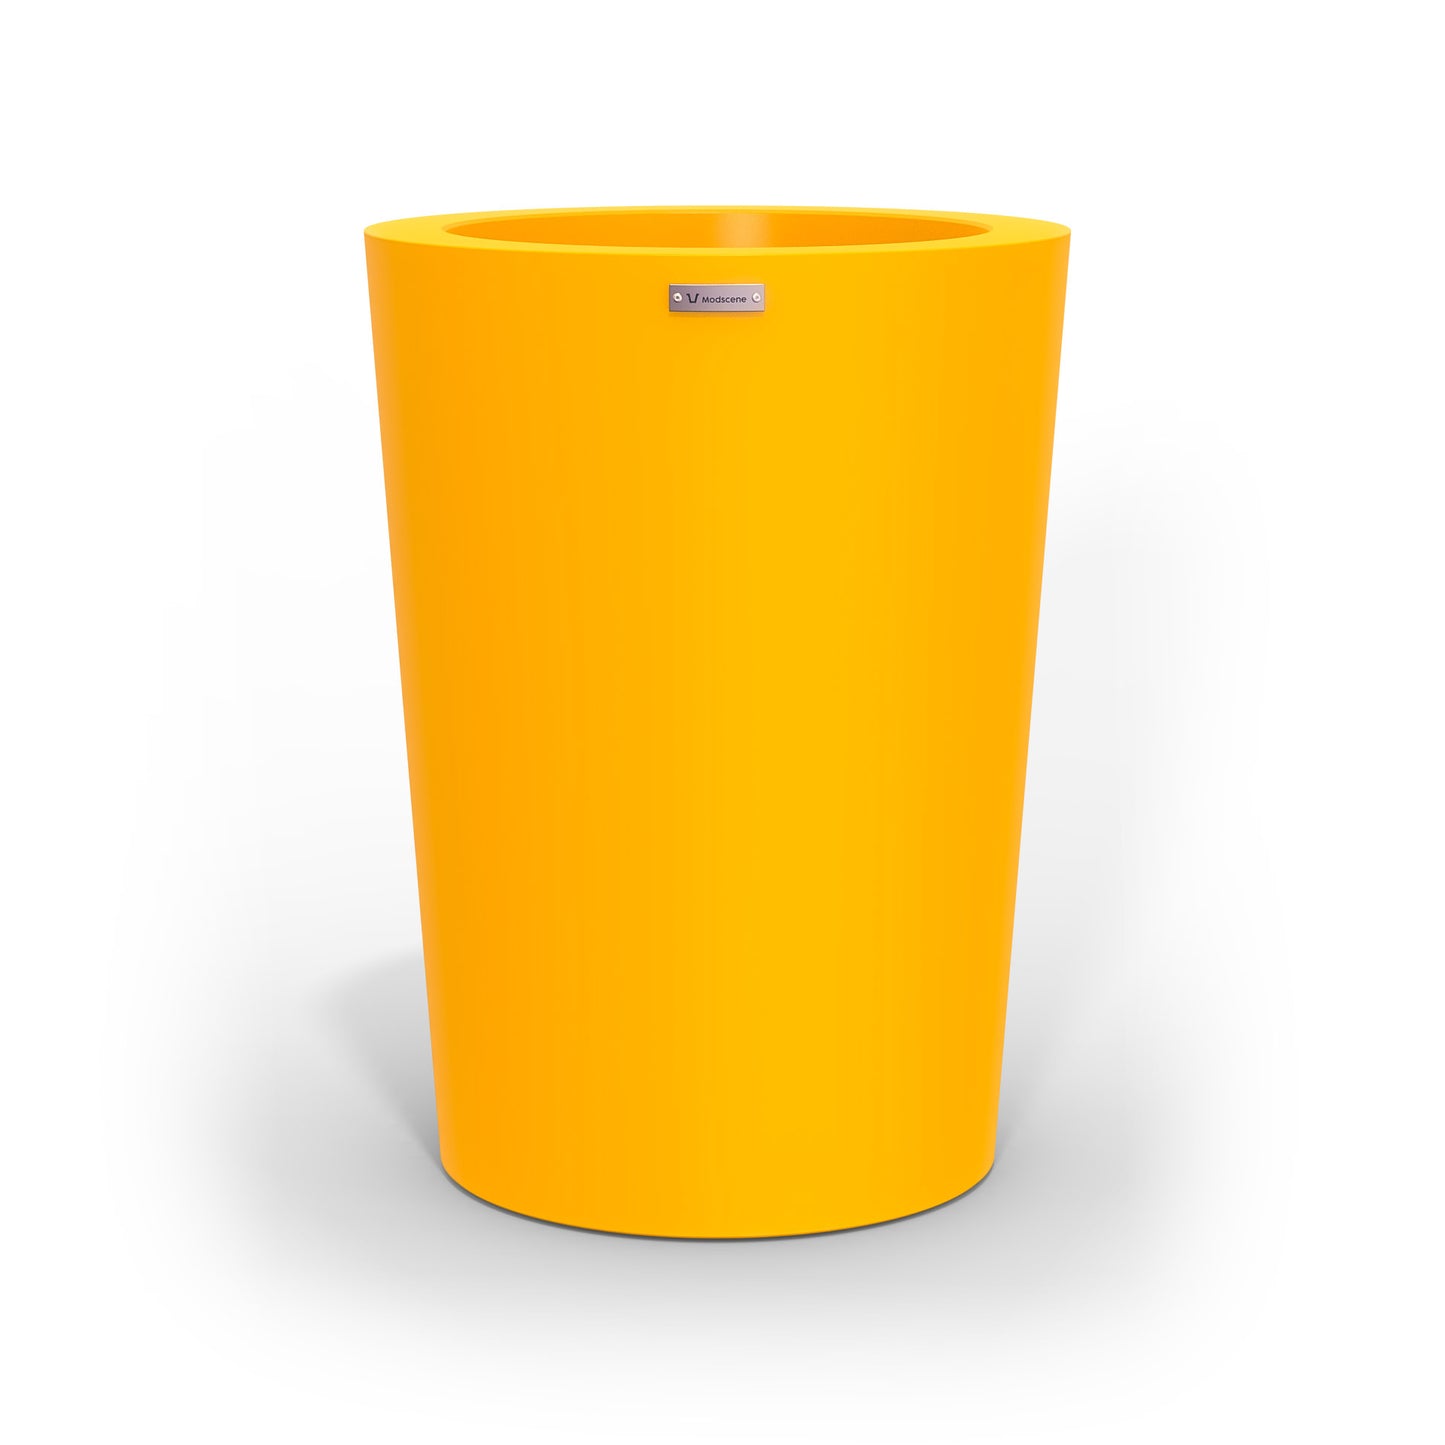 A modern style planter pot in yellow. Made by Modscene NZ.